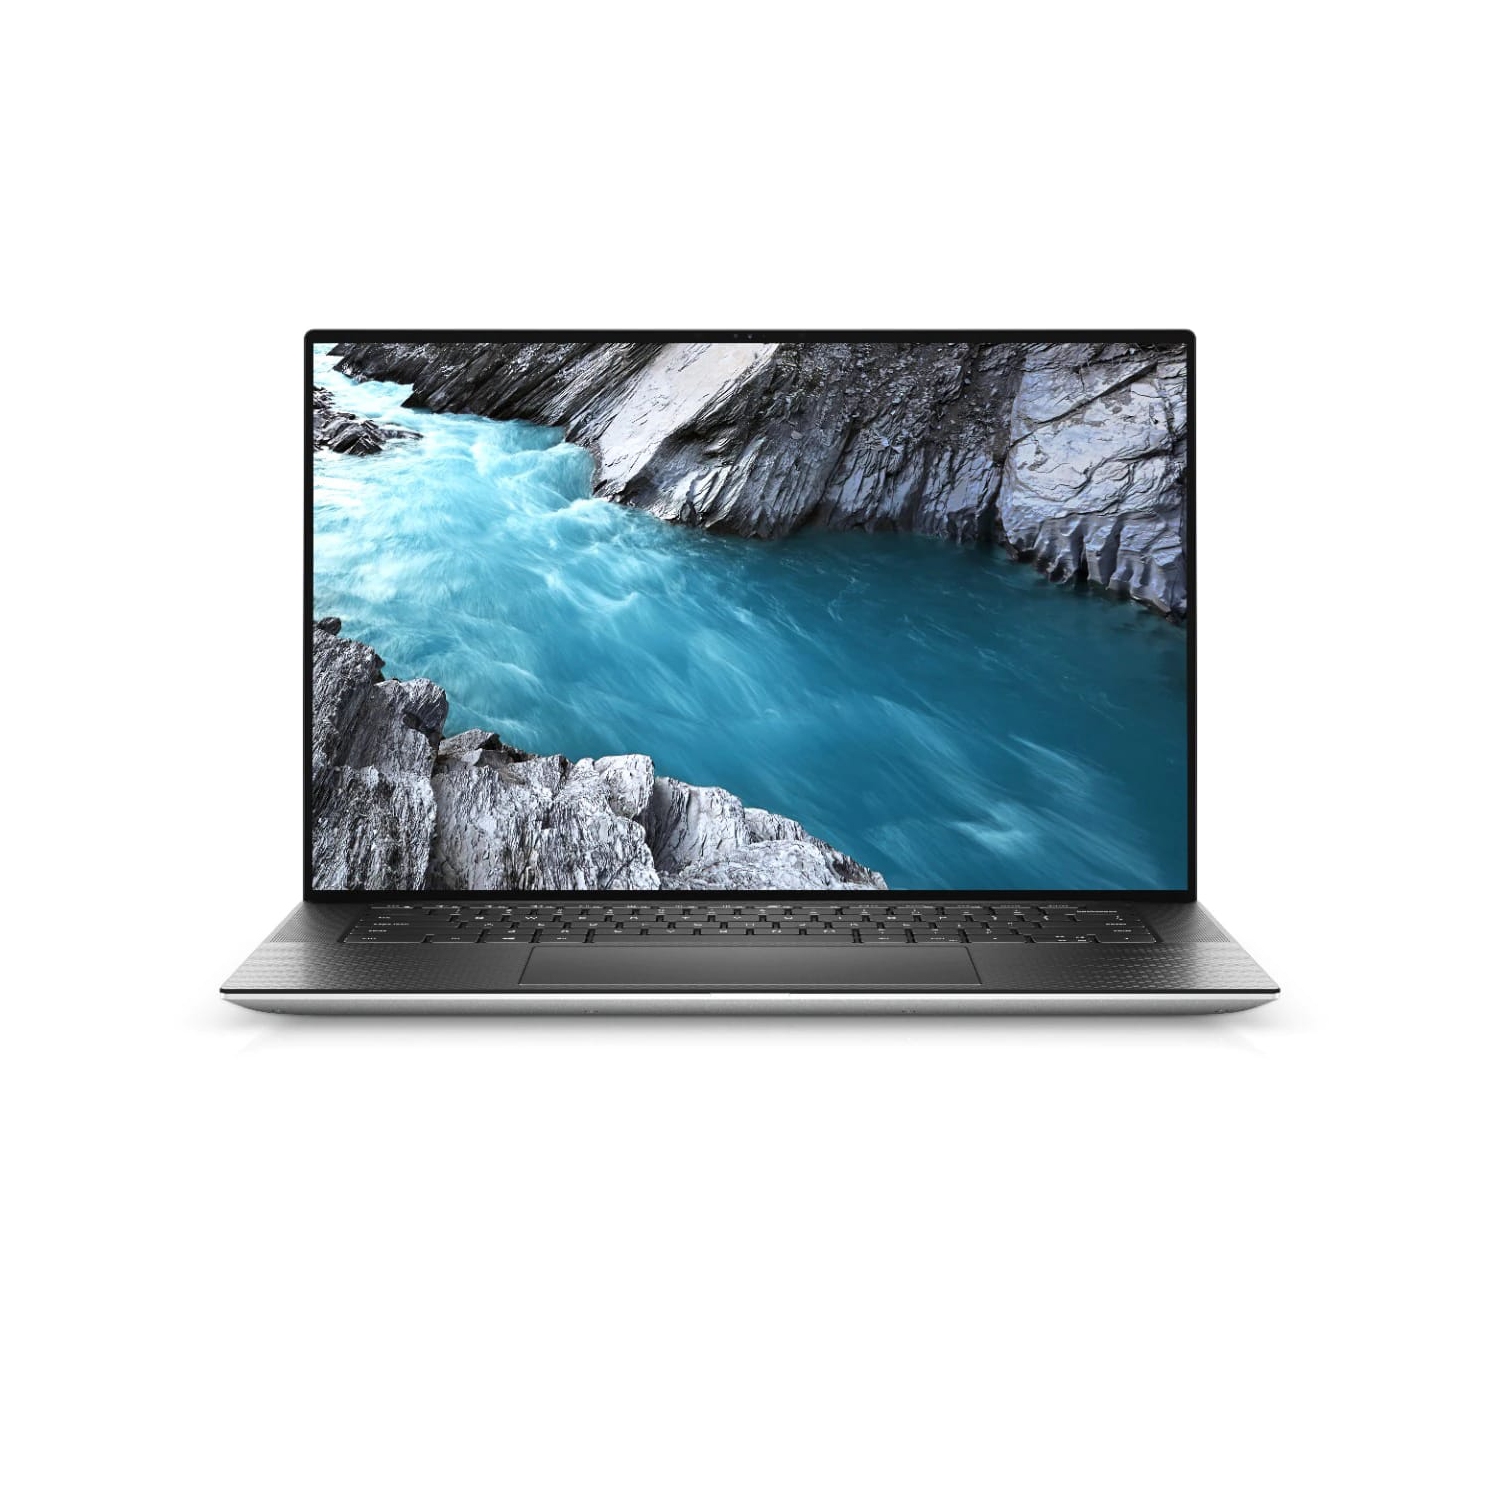 Refurbished (Excellent) - Dell XPS 15 9500 Laptop (2020) | 15" FHD+ | Core i7 - 512GB SSD - 32GB RAM - 1650 Ti | 6 Cores @ 5 GHz - 10th Gen CPU Certified Refurbished